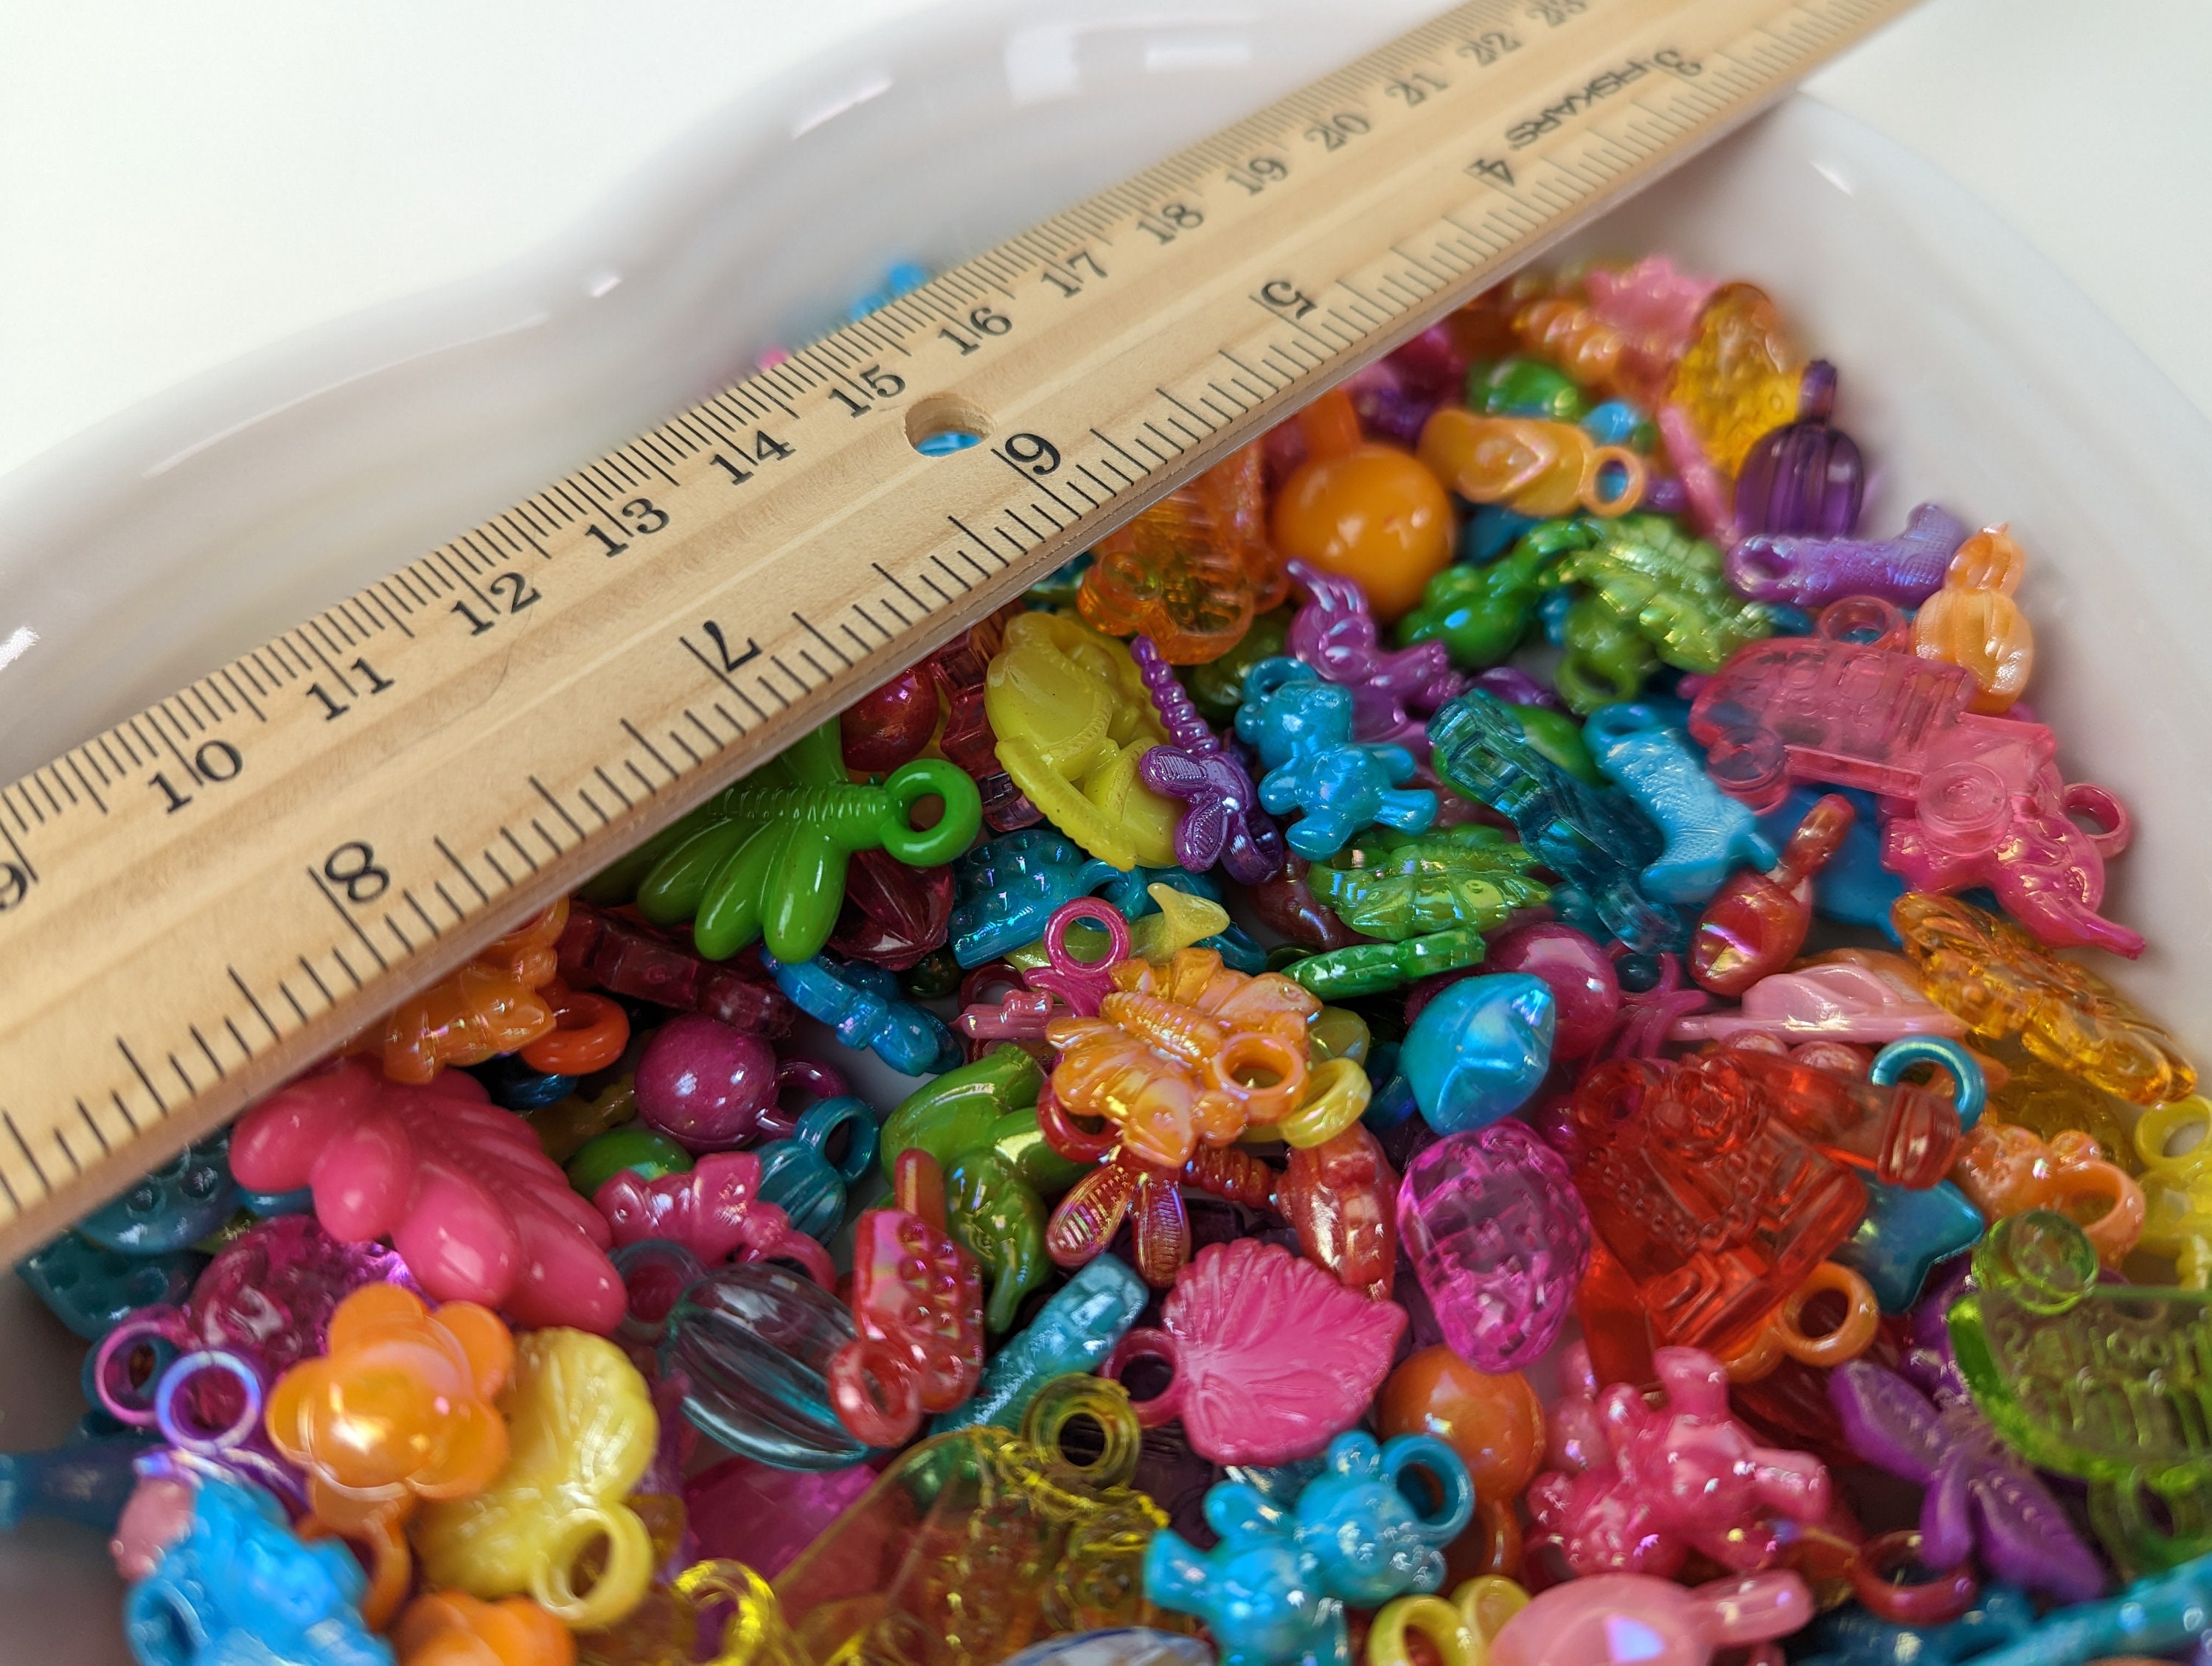 Tiny Bead Dangles, Bulk Pack of 50 Small Assorted Charms